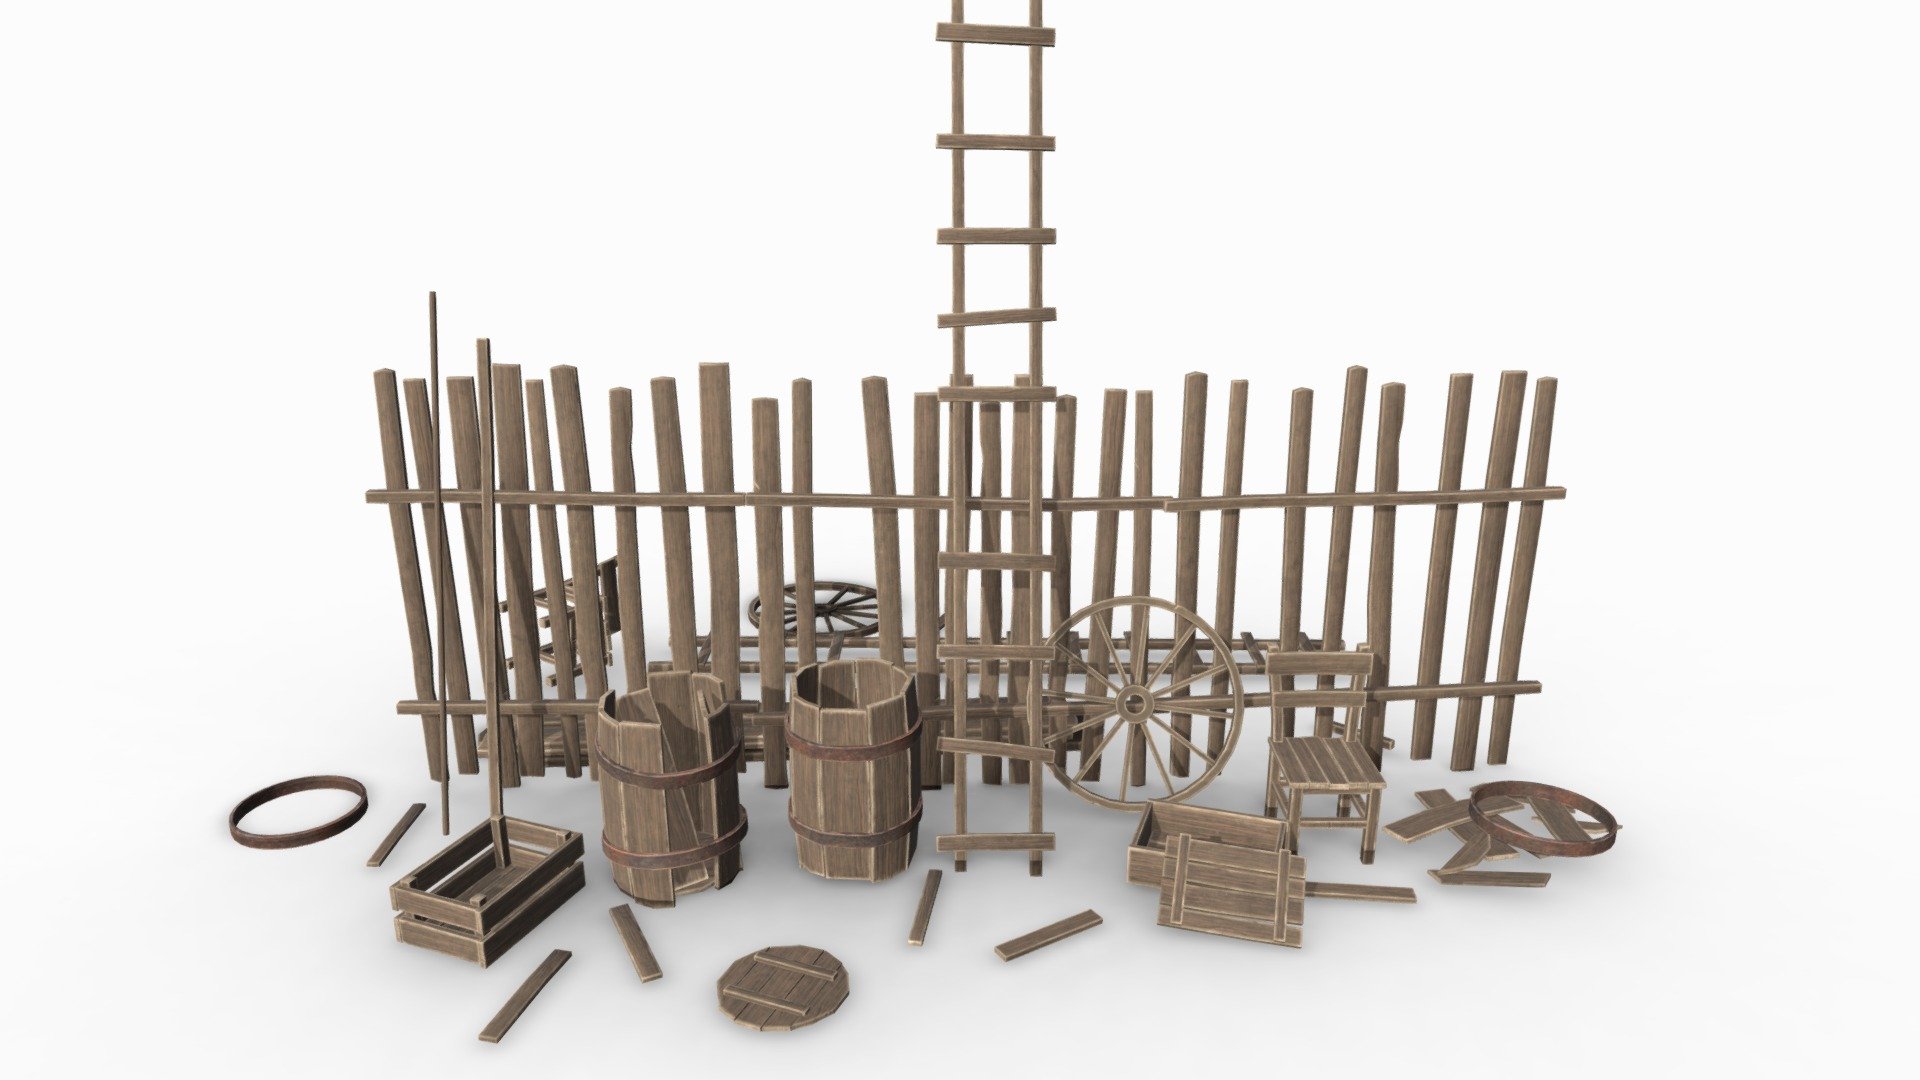 A collection of highly versatile medieval wooden props.Package contains 42 different objects : Box, barrel, wheel, chair, fence, ladder,wooden board. Low-poly construct model for gaming. Ideal for building assemblies in game engines.
You can easy shift position of props or copy them to create even bigger props within minutes. Very easy to modify. All materials and textures included. It's readily available to import in Unity3D and Ue4. The example scene through included in the package. 

1 Material, pbr textures 2048x2048 (Ambient occlusion, Base Color, Height, Normal, Roughness)

https://www.artstation.com/a/6869368 - Modular Wooden Props - 3D model by Crazy_8 (@korboleevd) 3d model